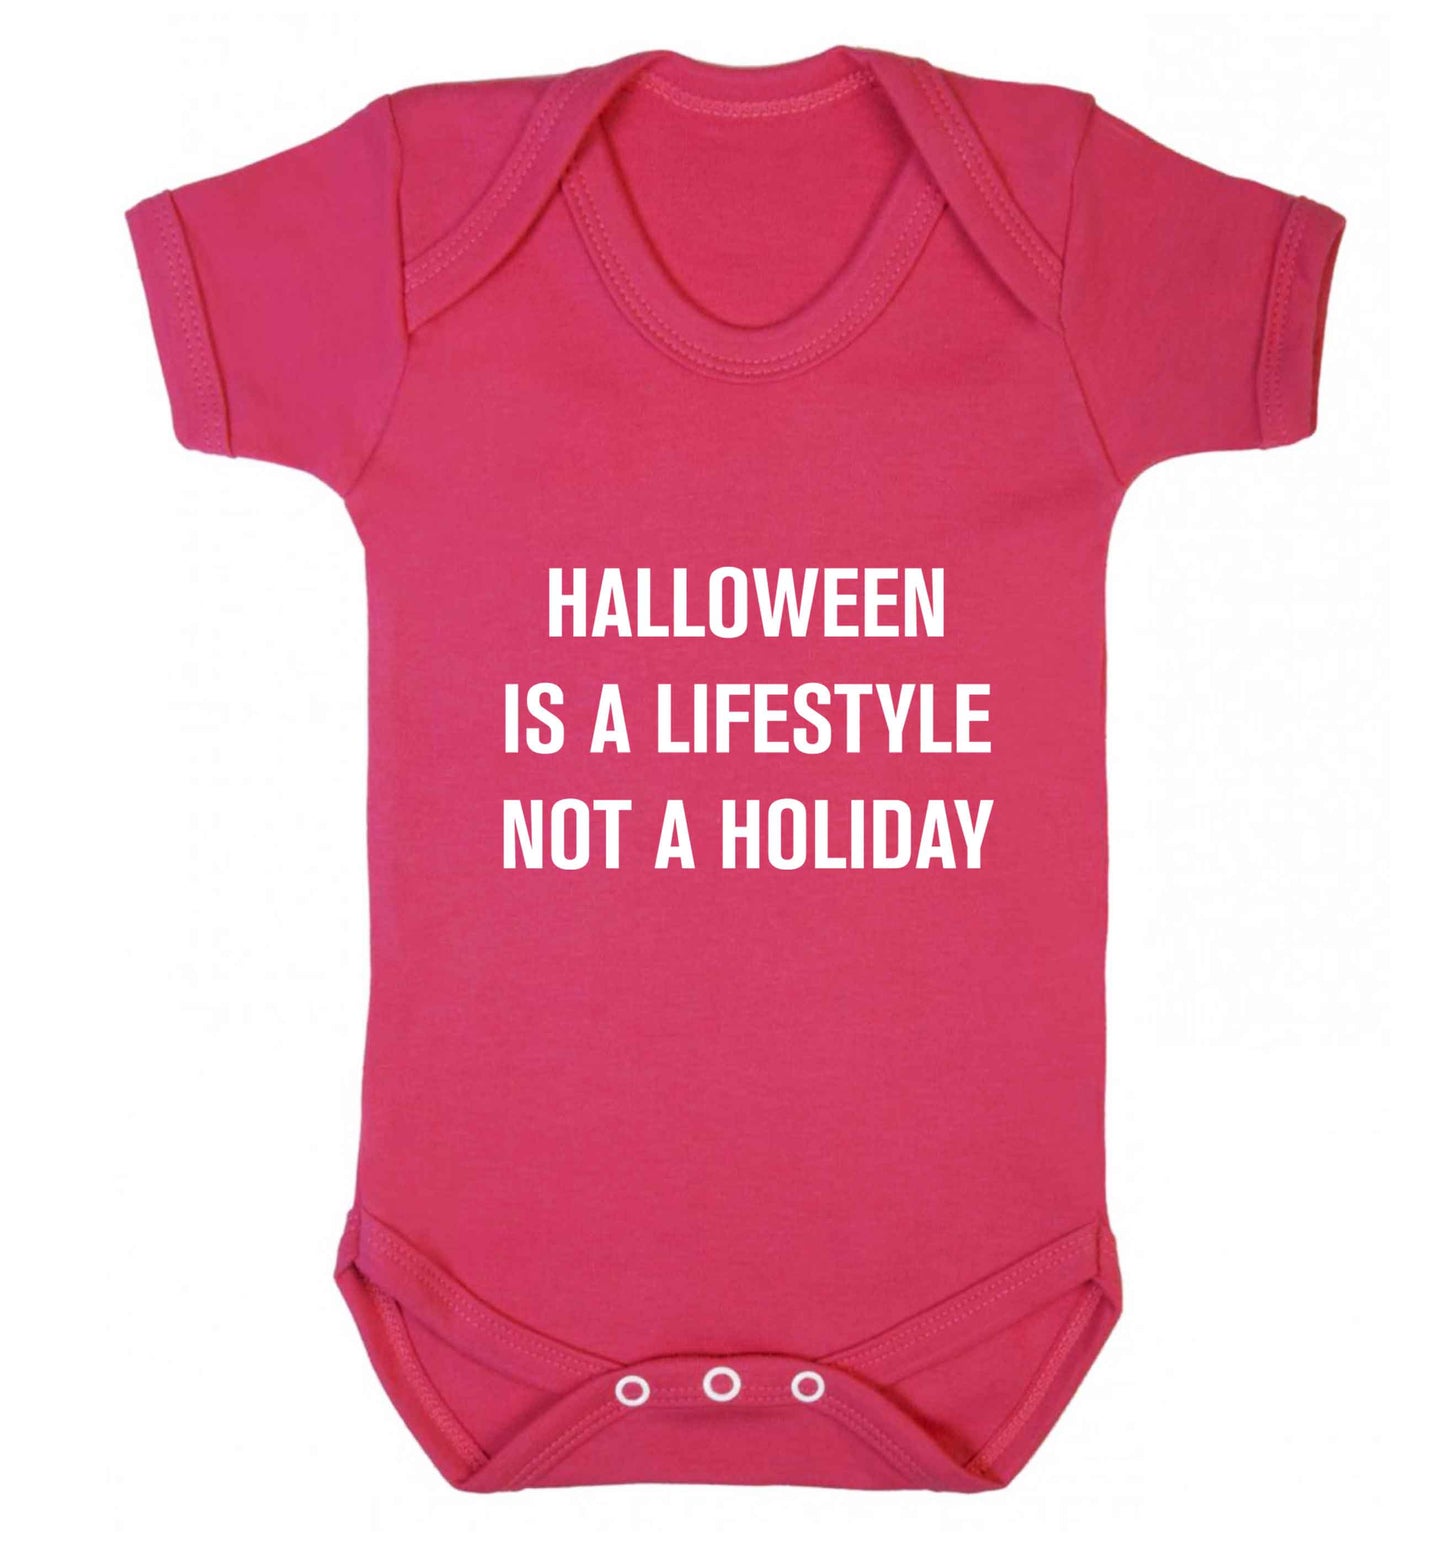 Halloween is a lifestyle not a holiday baby vest dark pink 18-24 months